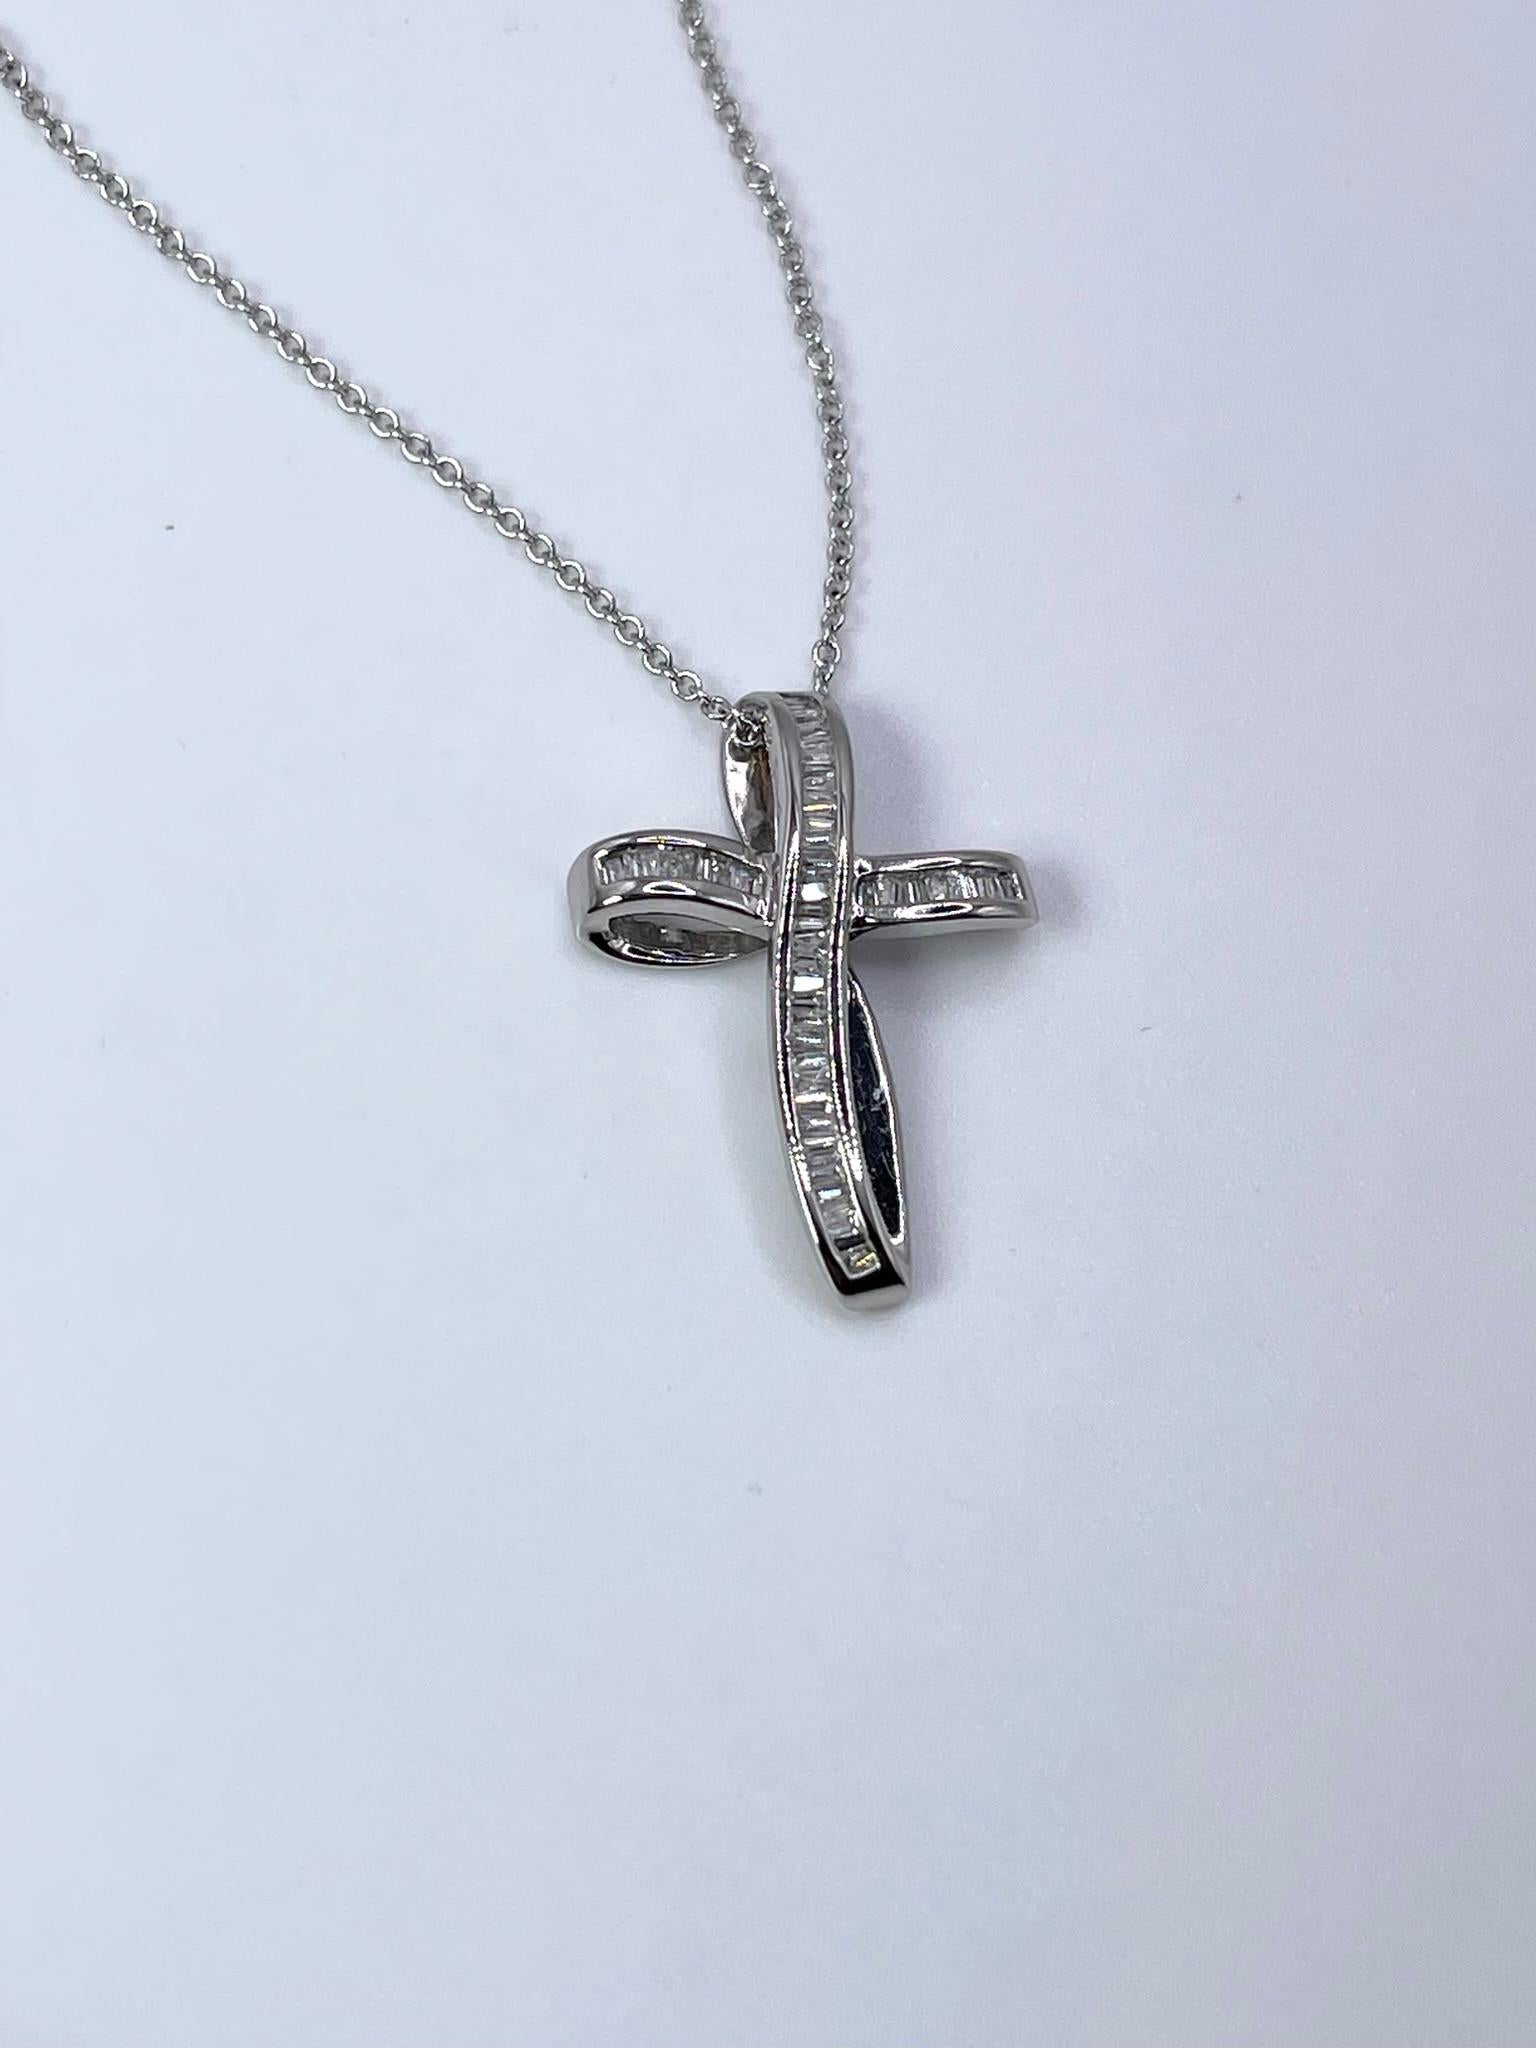 Stunning large cross pendant necklace made with baguette diamonds in channel setting in 14KT white gold. Beautiful finish polishied pendant neckllace!!!
GRAM WEIGHT: 2.71gr
GOLD: 14KT white gold
NECKLACE chain-18